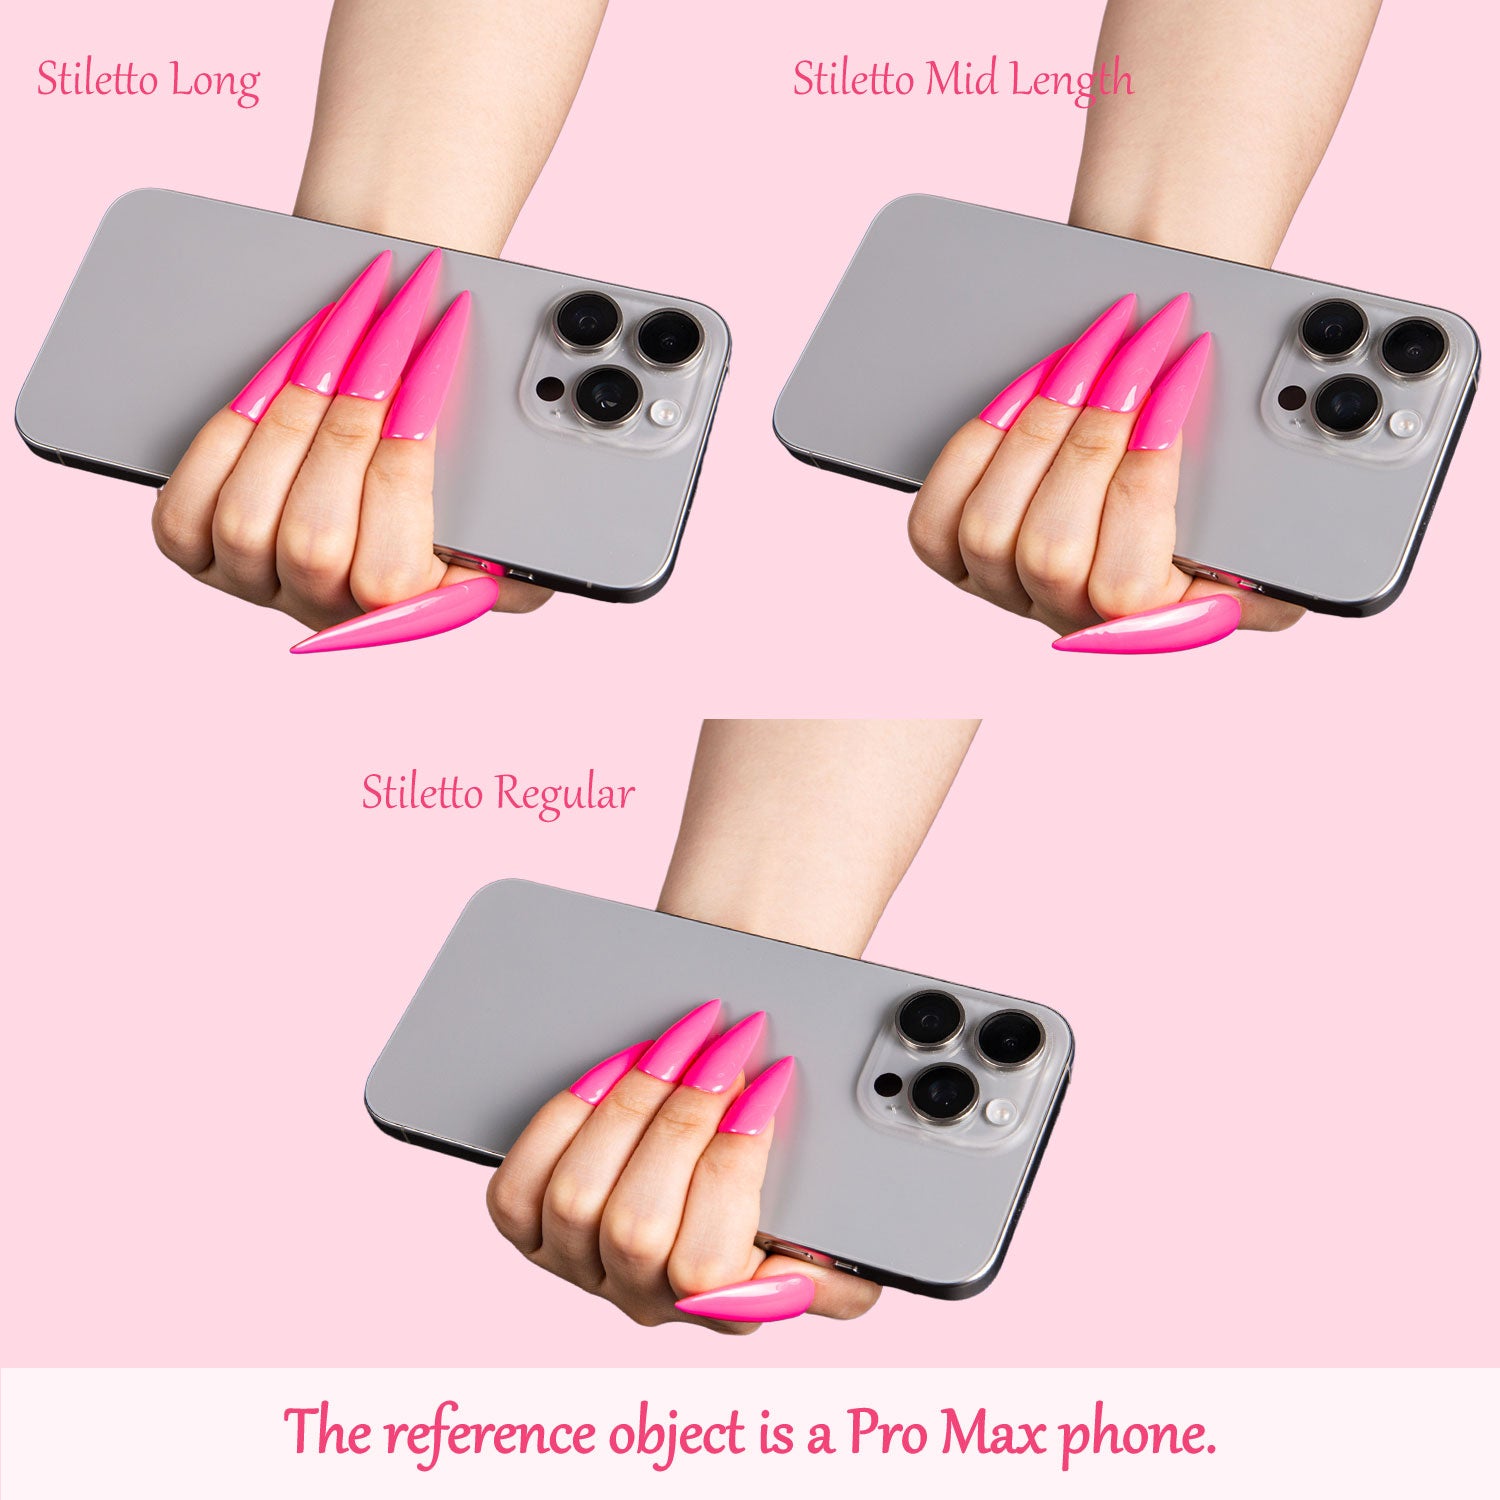 Three variations of pink stiletto press-on nails labeled as Stiletto Long, Stiletto Mid Length, and Stiletto Regular, each holding a Pro Max phone for reference.